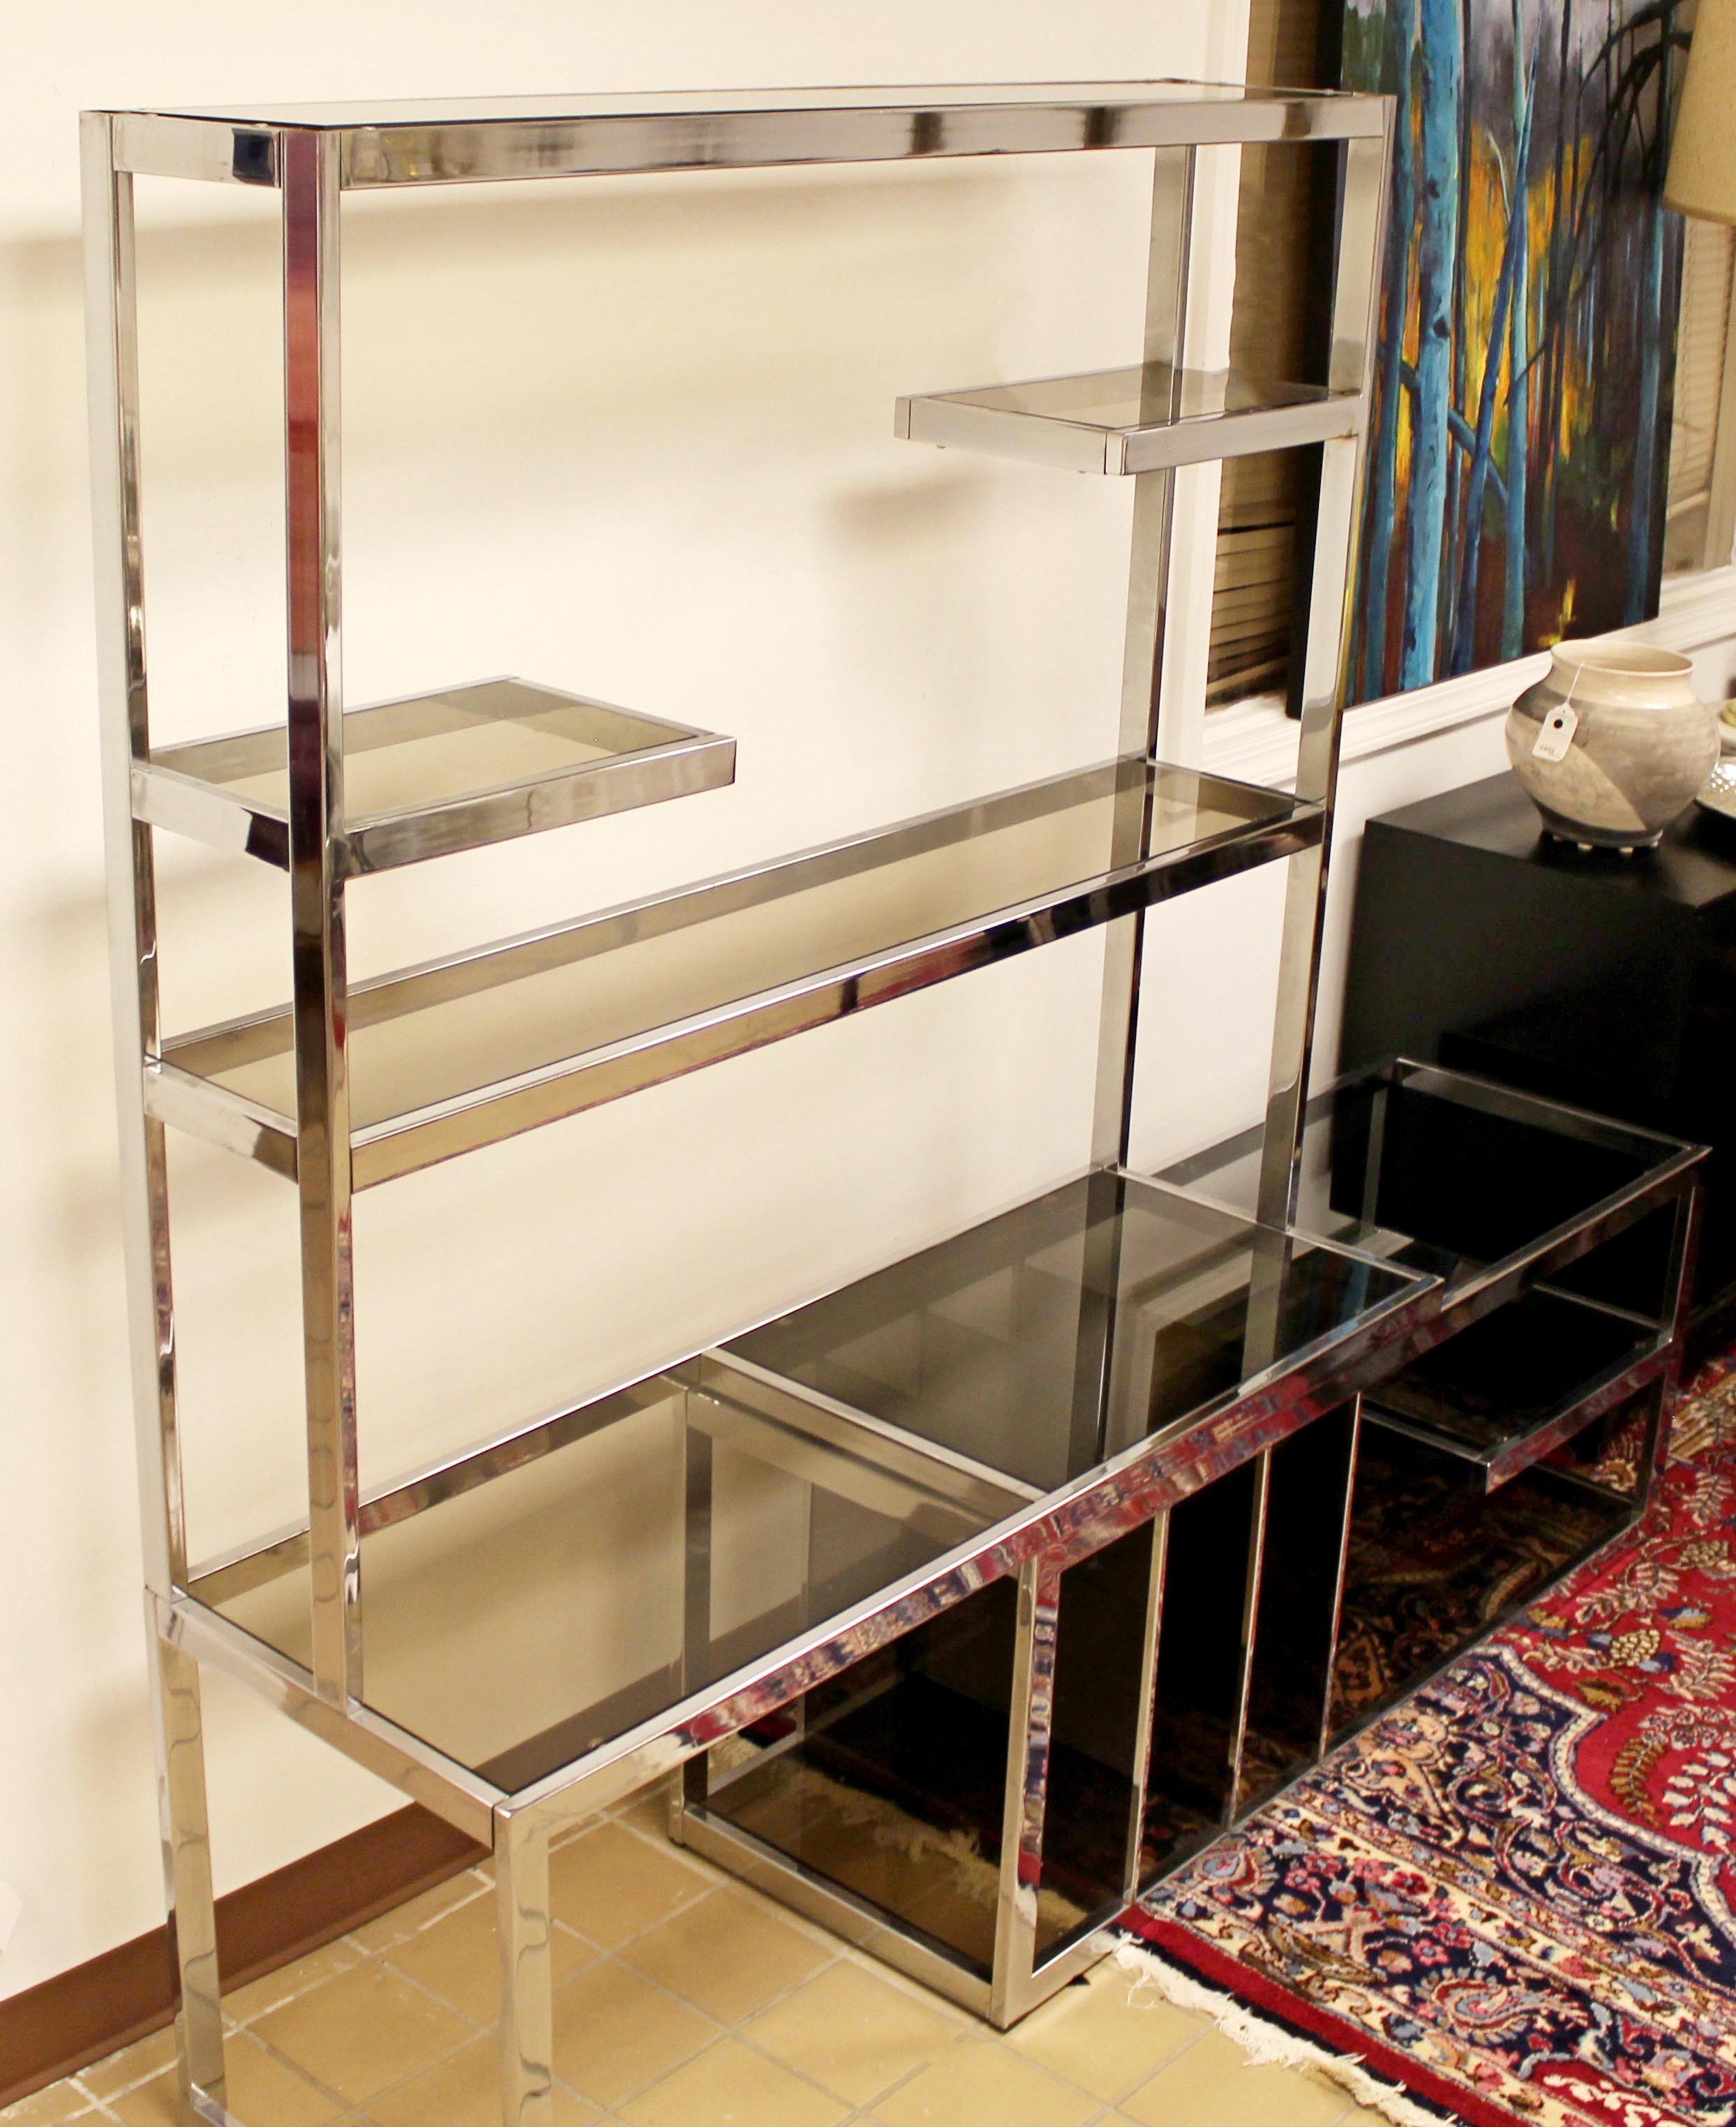 For your consideration is a stunning, chrome étagère, with smoked glass shelves and an expandable storage compartment, by Milo Baughman, circa the 1970s. In excellent condition. The dimensions closed are 50